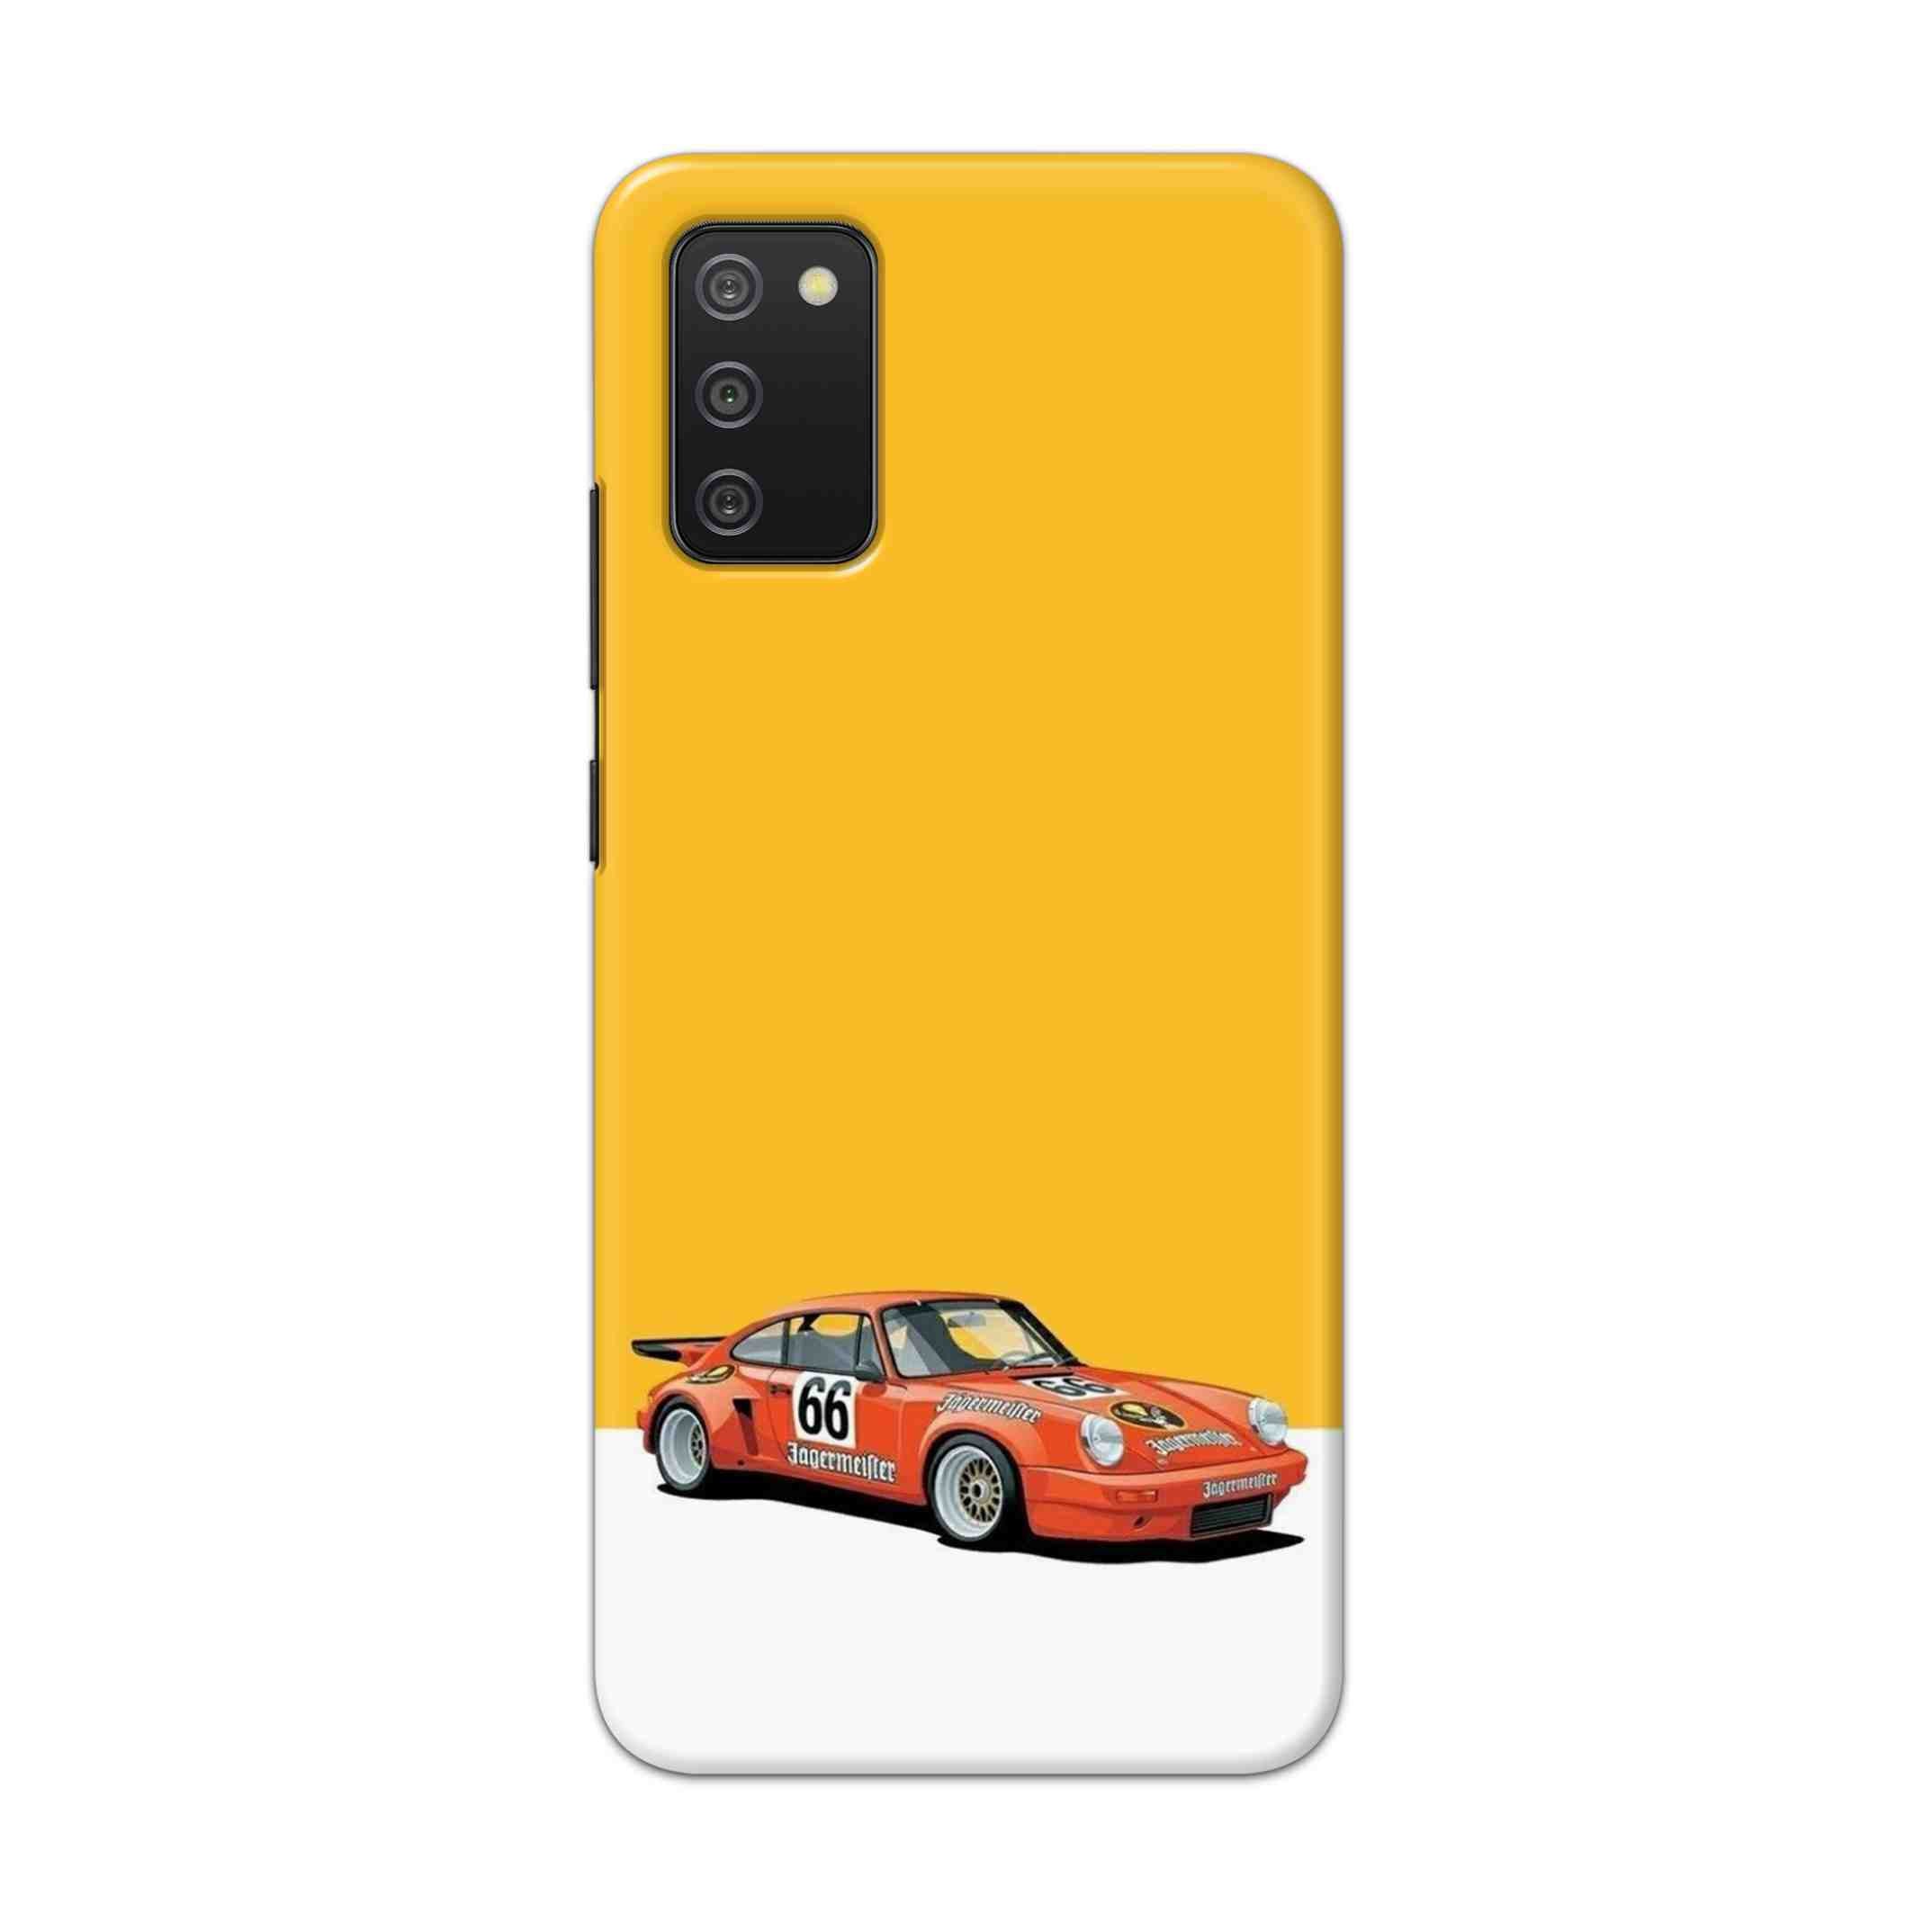 Buy Porche Hard Back Mobile Phone Case Cover For Samsung Galaxy M02s Online